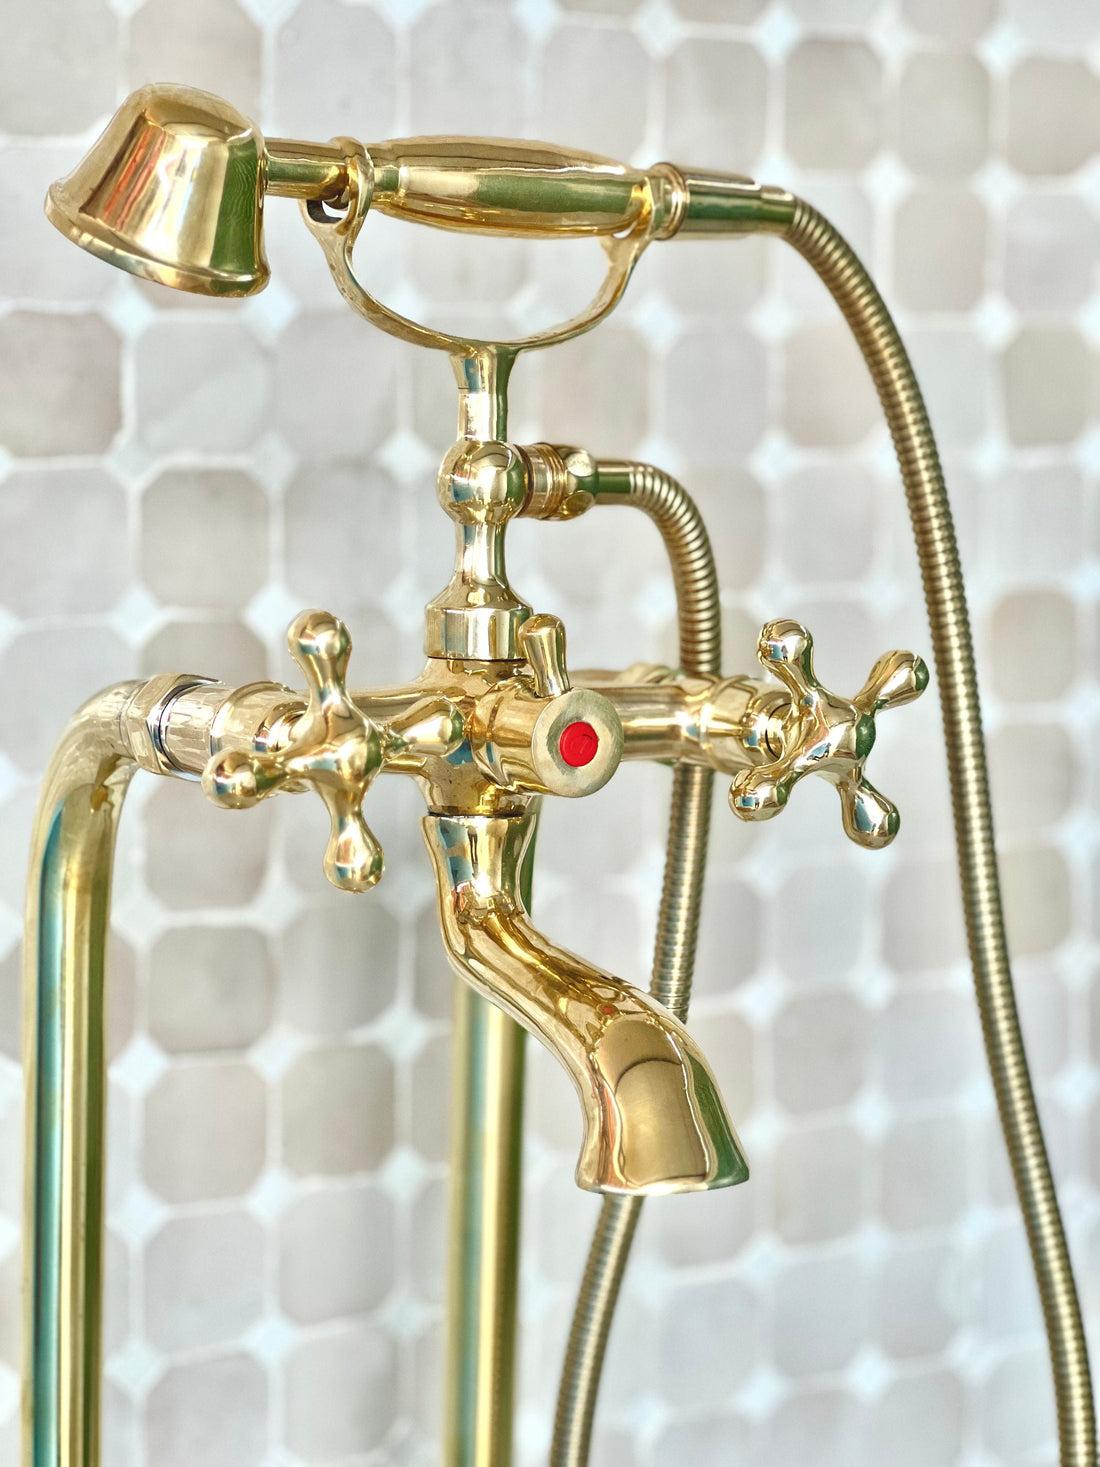 Unlacquered Brass Freestanding Tub Filler With Hand Held, Solid Brass Faucet